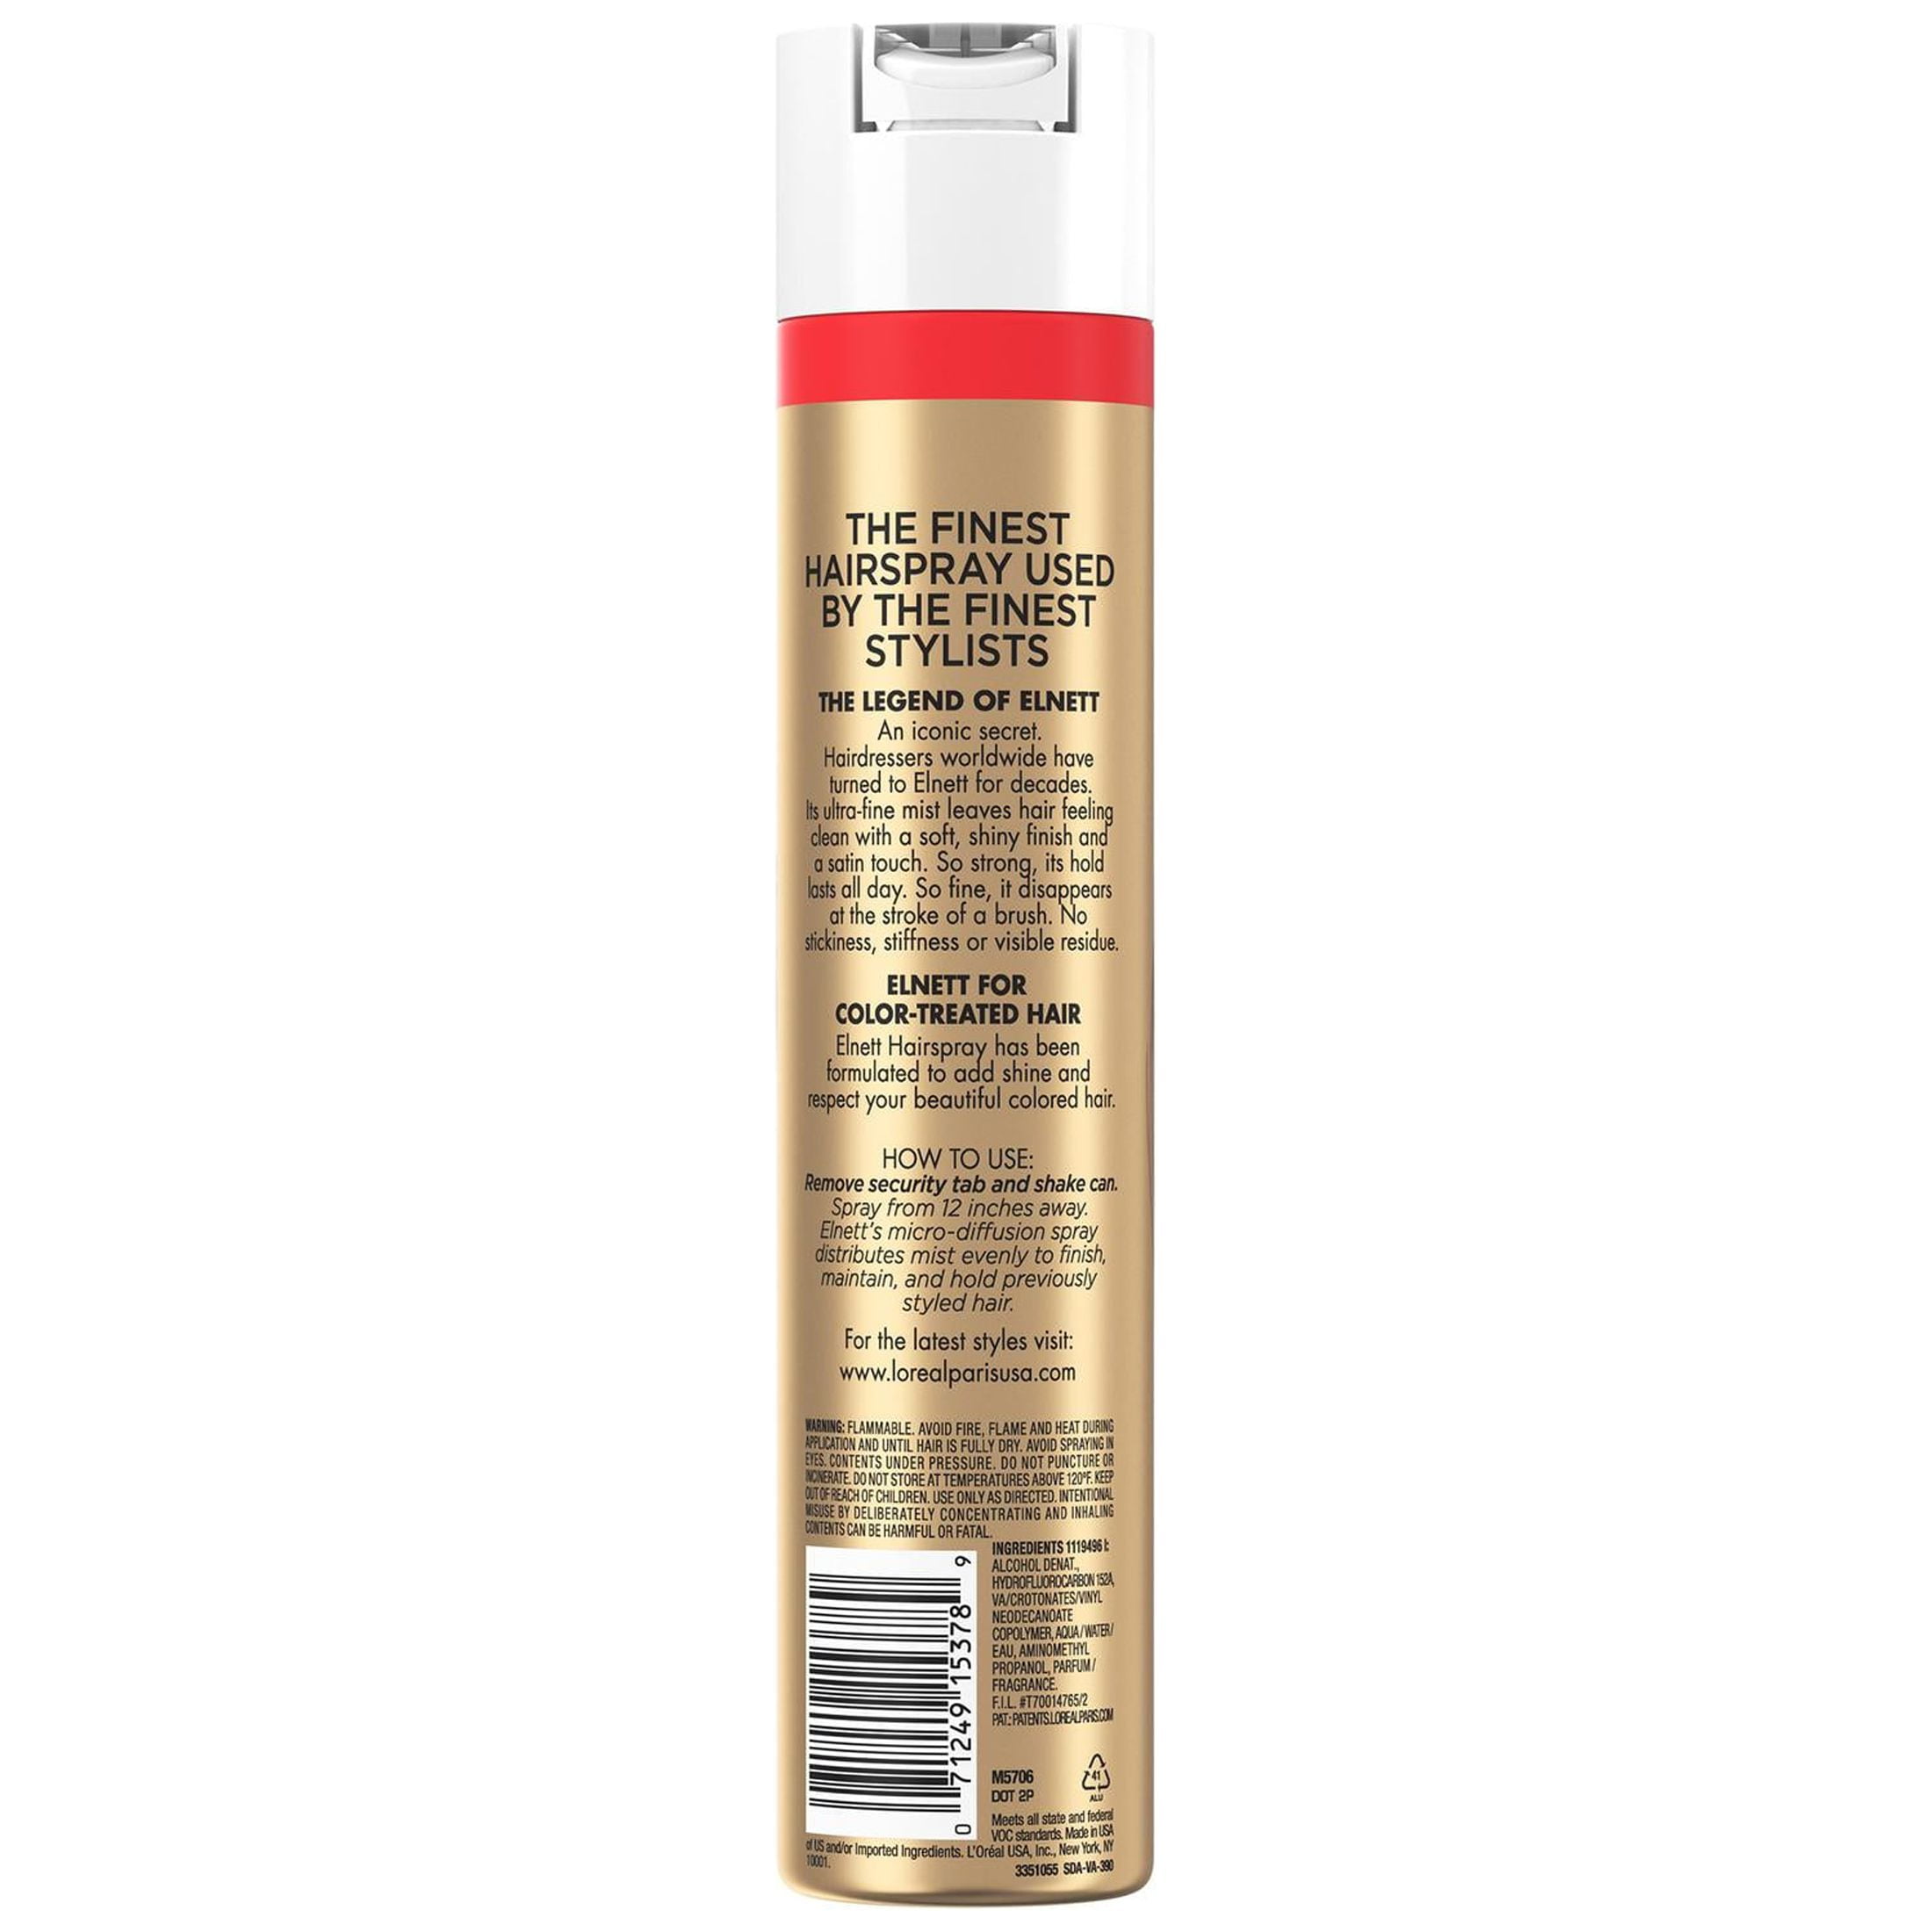 L'Oreal Paris Elnett Satin Extra Strong Hold Hairspray 11 Ounce (1 Count)  (Packaging May Vary)